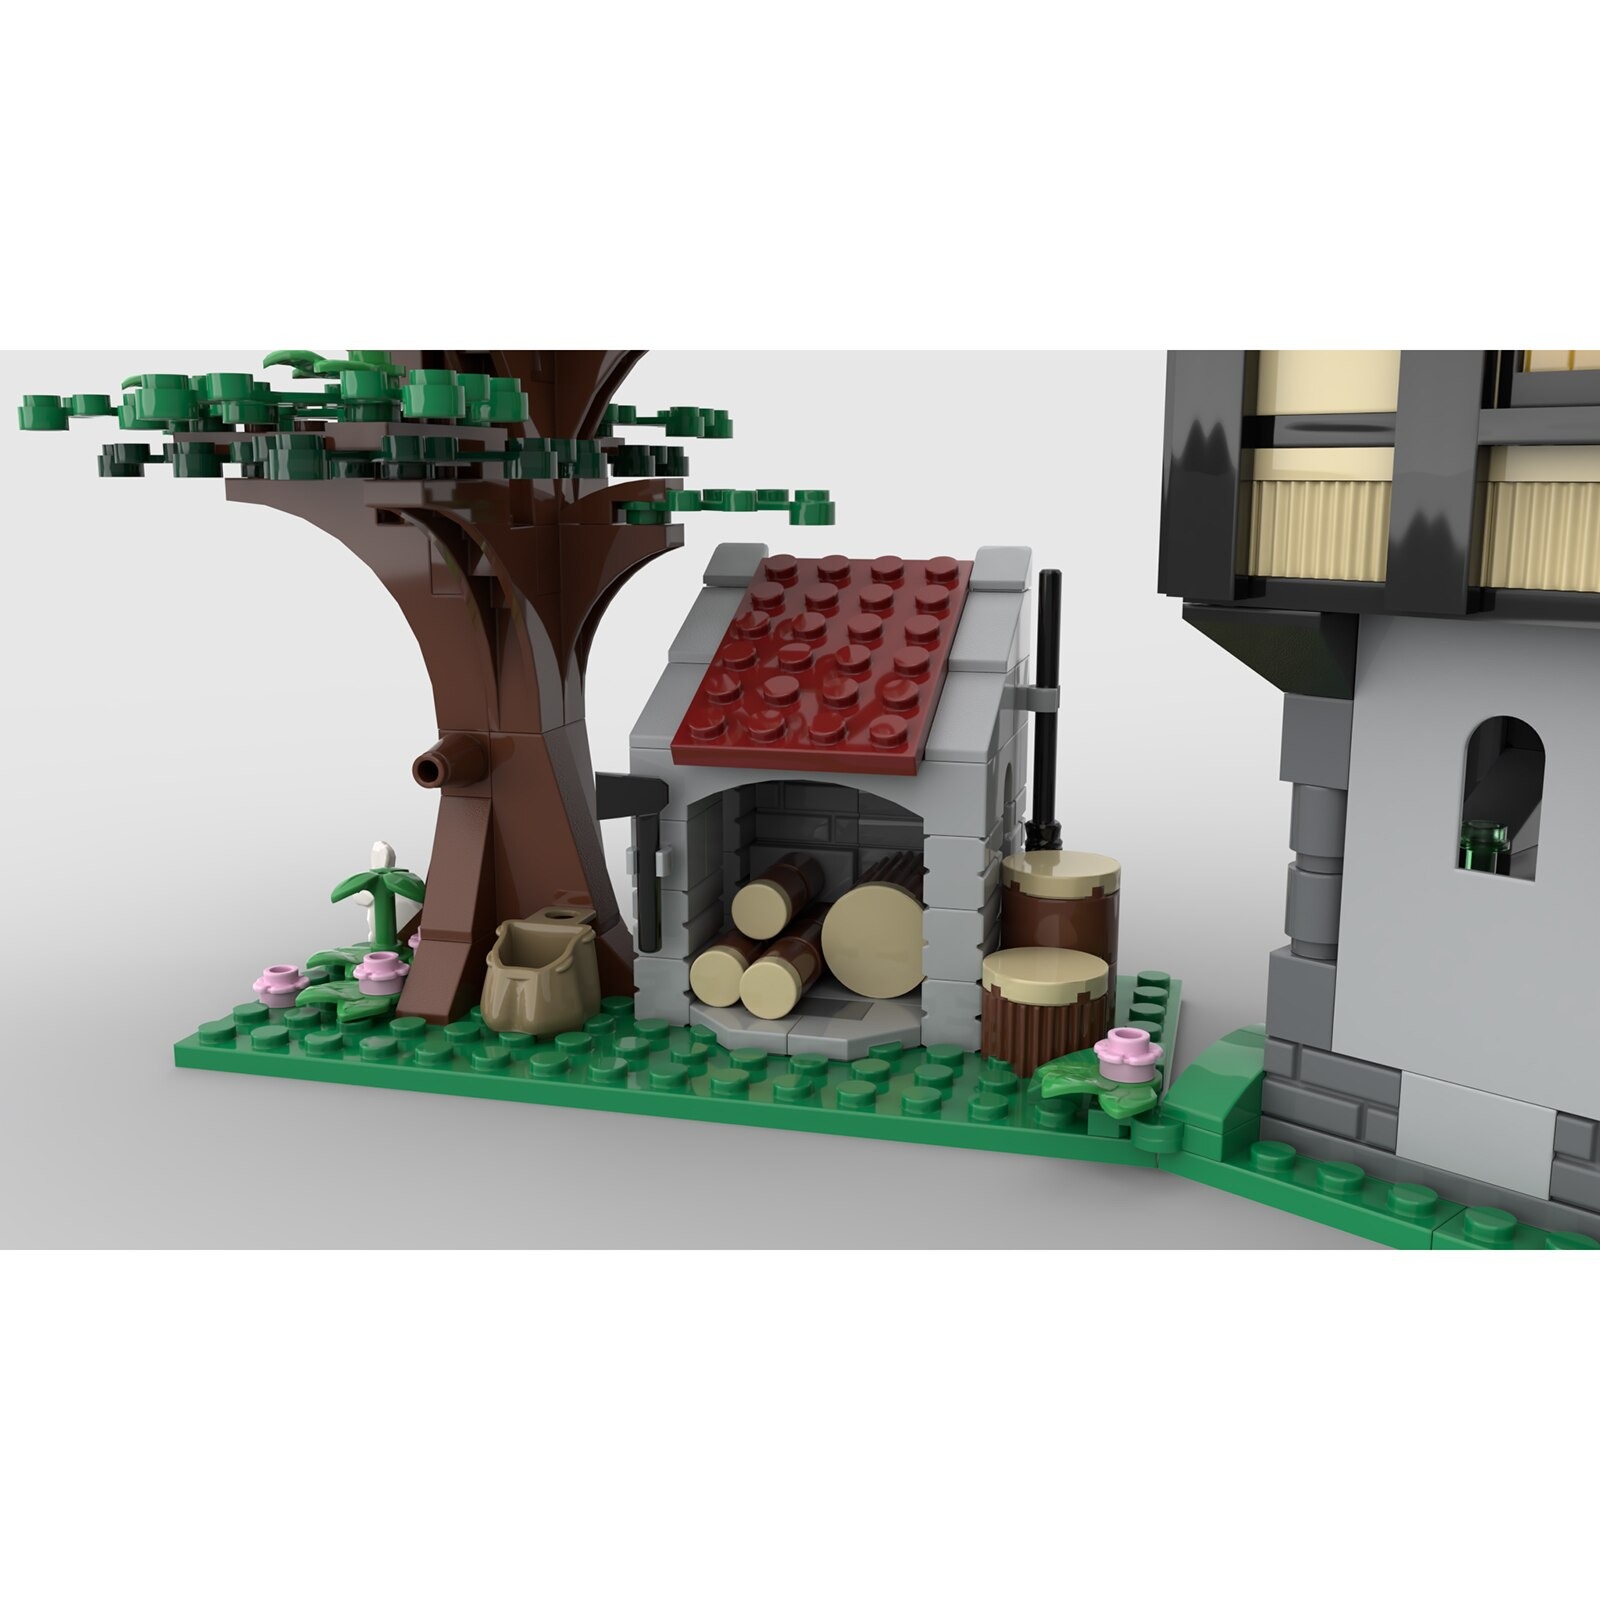 authorized moc 82740 medieval house 524 p main 4 - MOULD KING